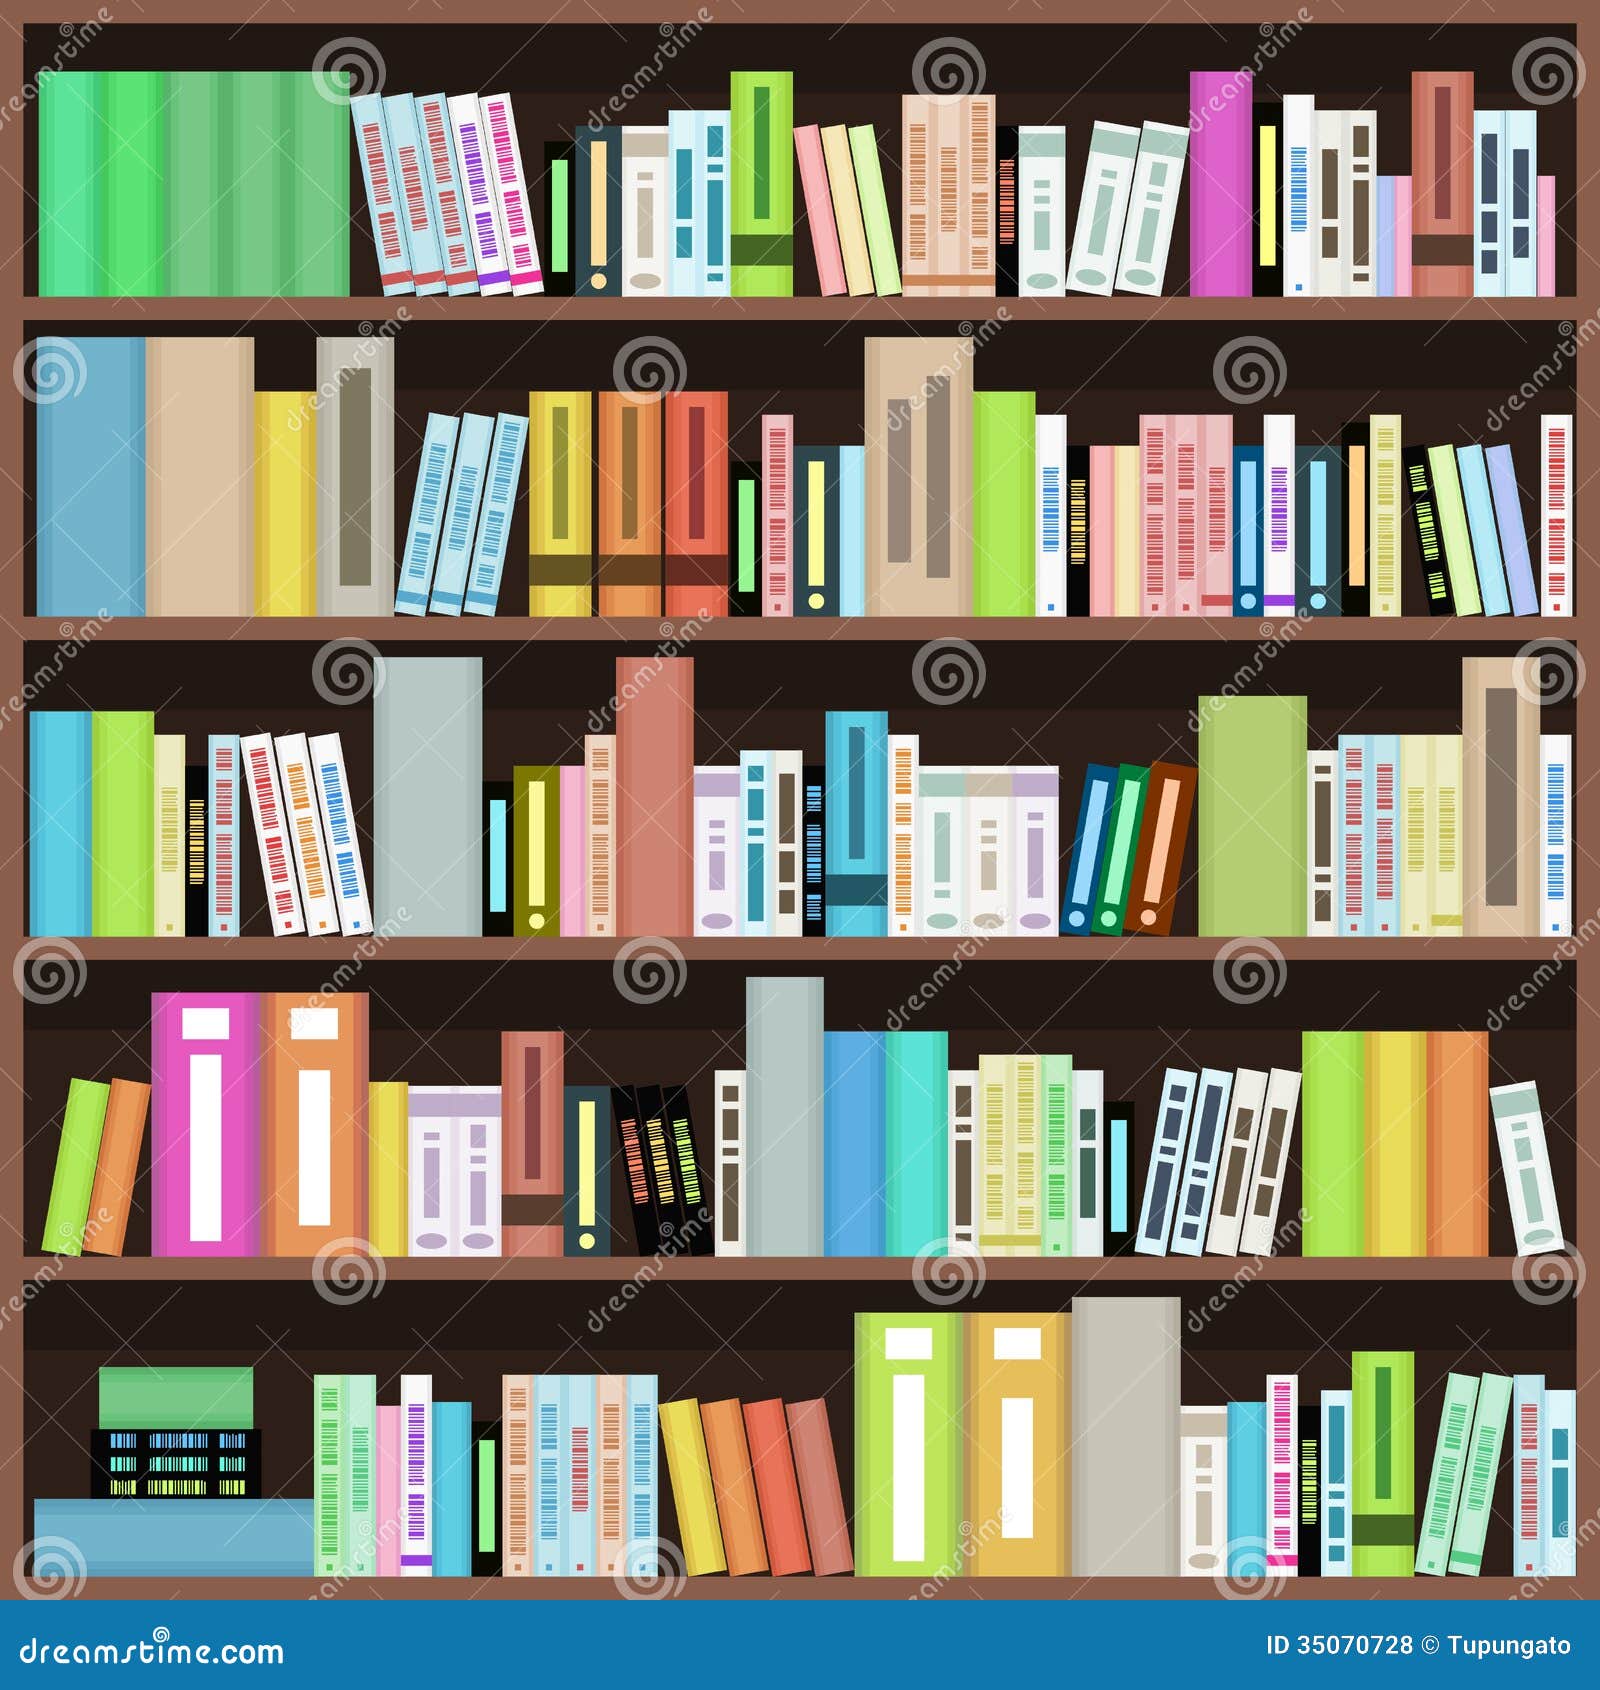 Bookcase stock vector. Illustration of learning, genres ...